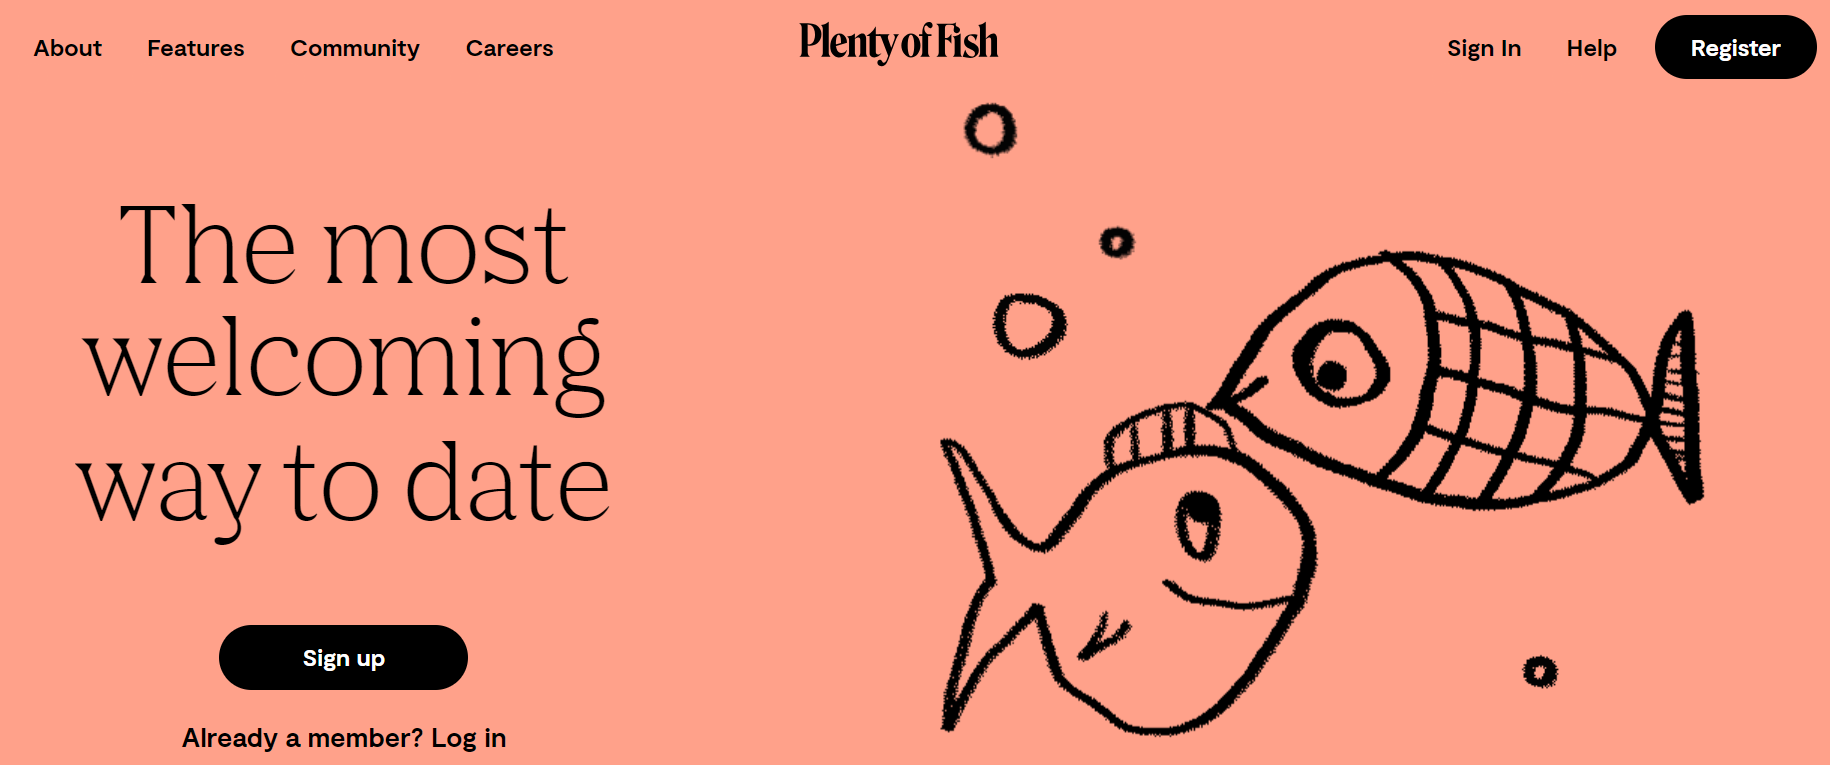 How To Do Plenty Of Fish Search Without Registering?